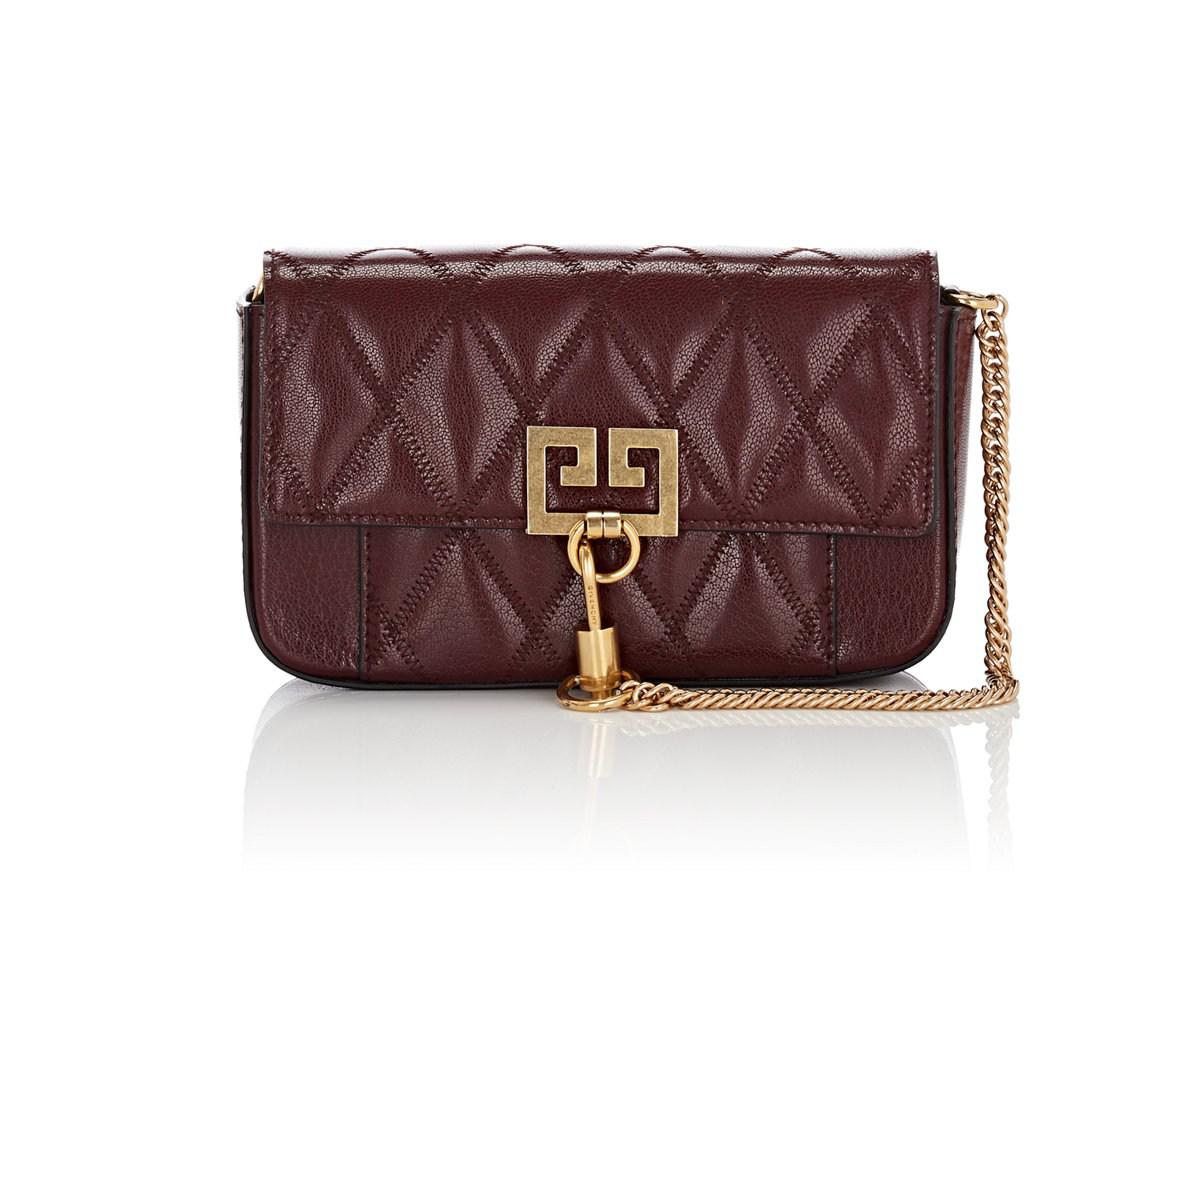 Givenchy Pocket Mini Leather Crossbody Bag in md. Red (Red) - Lyst